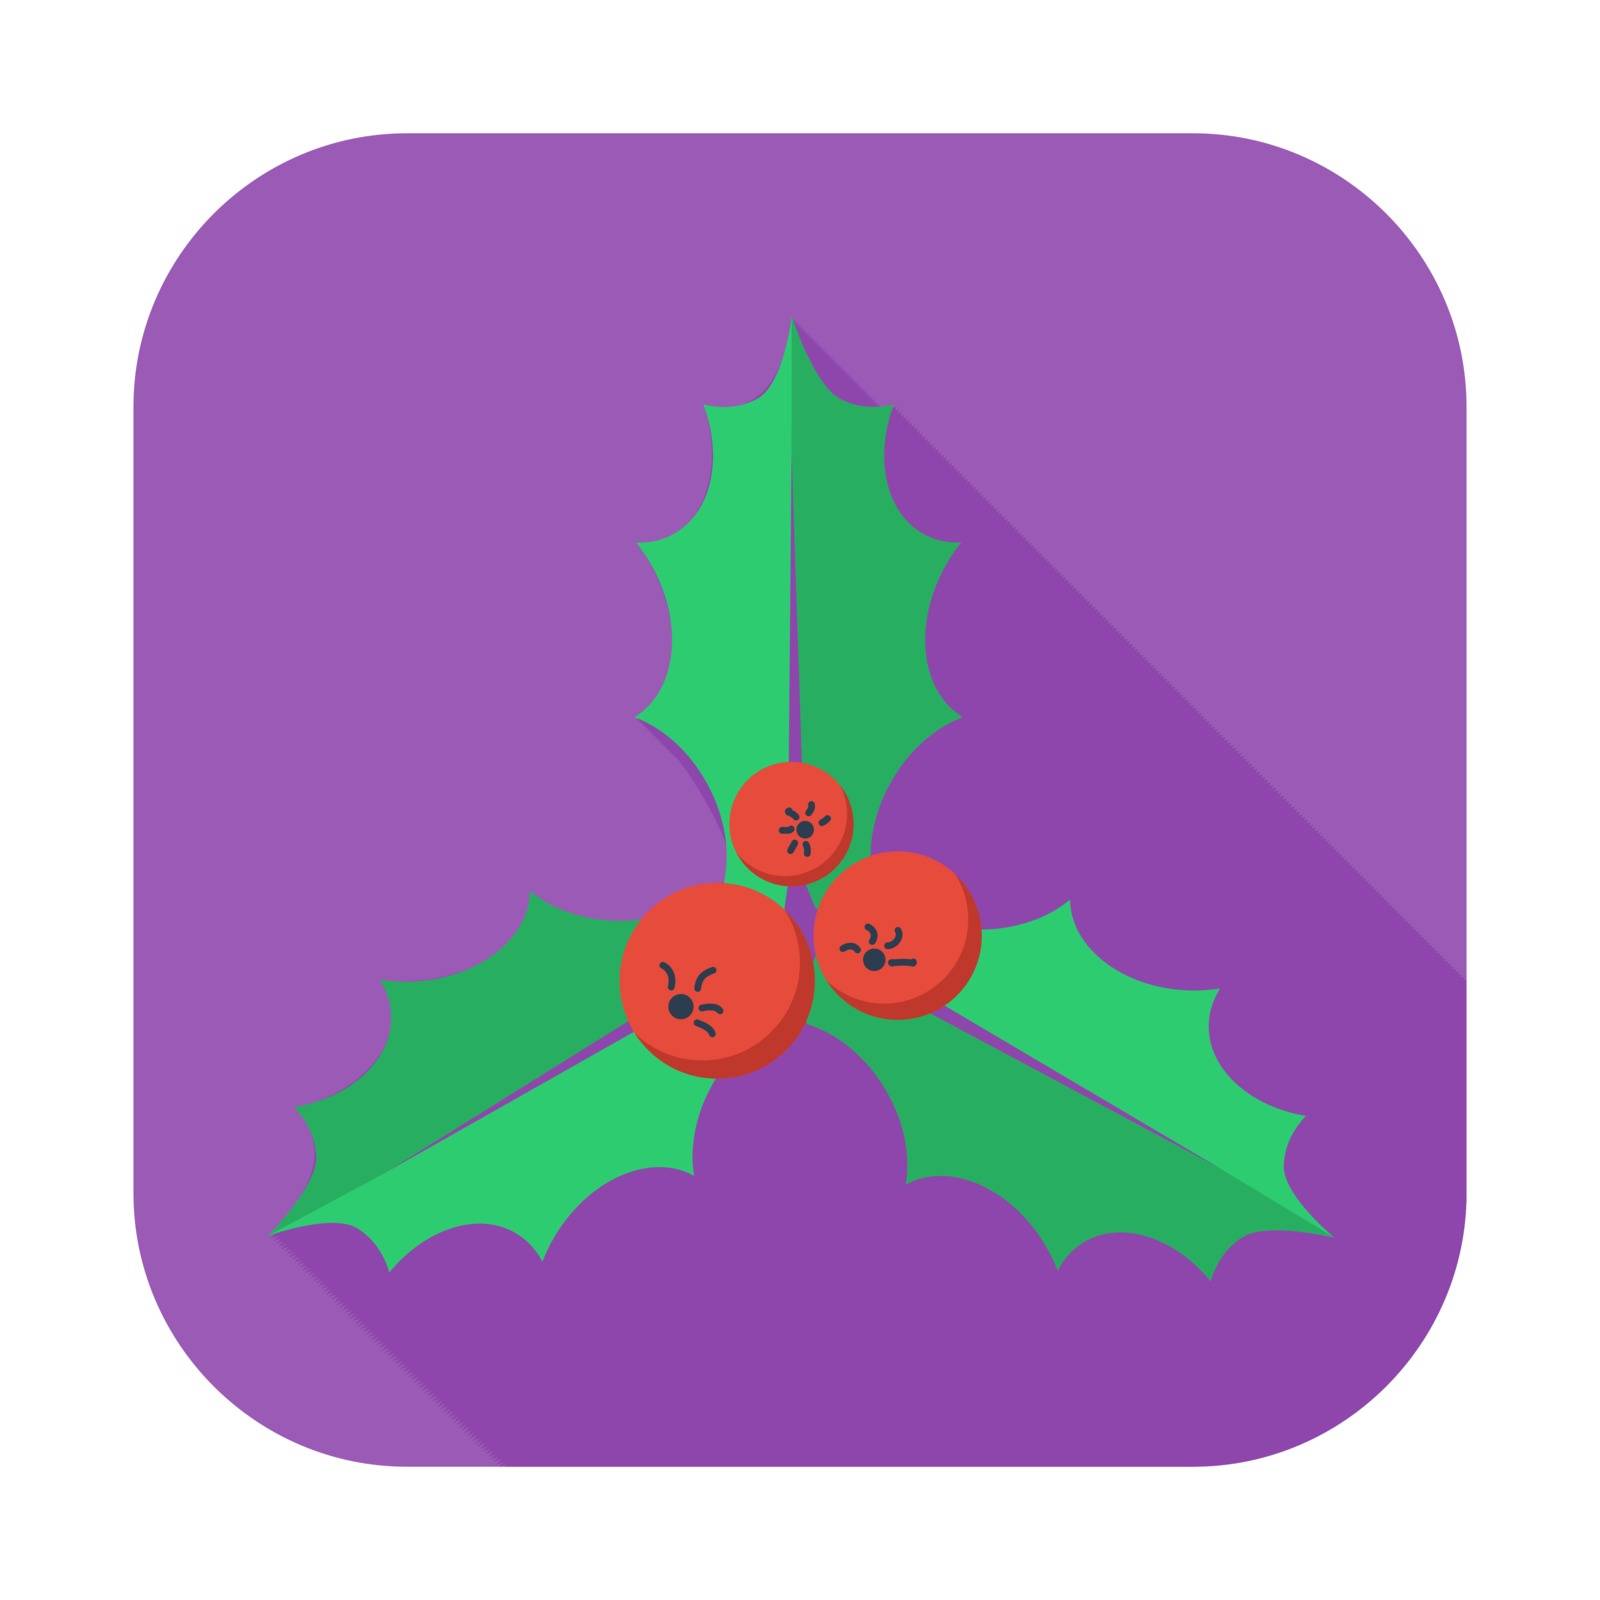 Holly berry. Single flat icon on the button. Vector illustration.